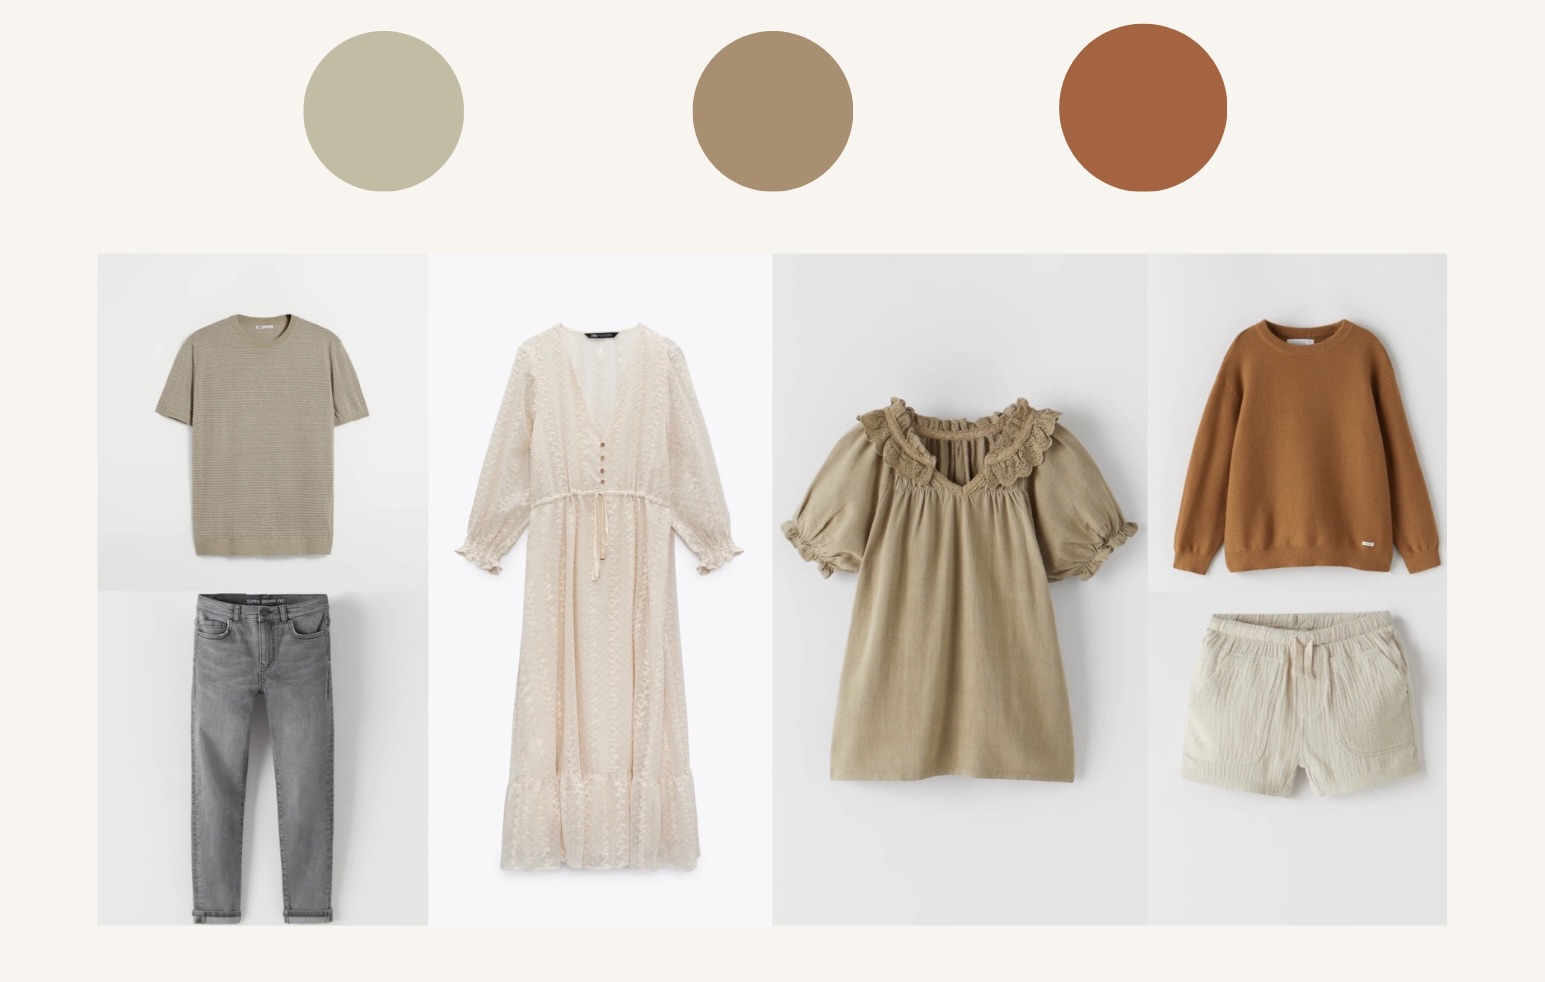 Family outfit idea with a color palette of orange, beige, and white